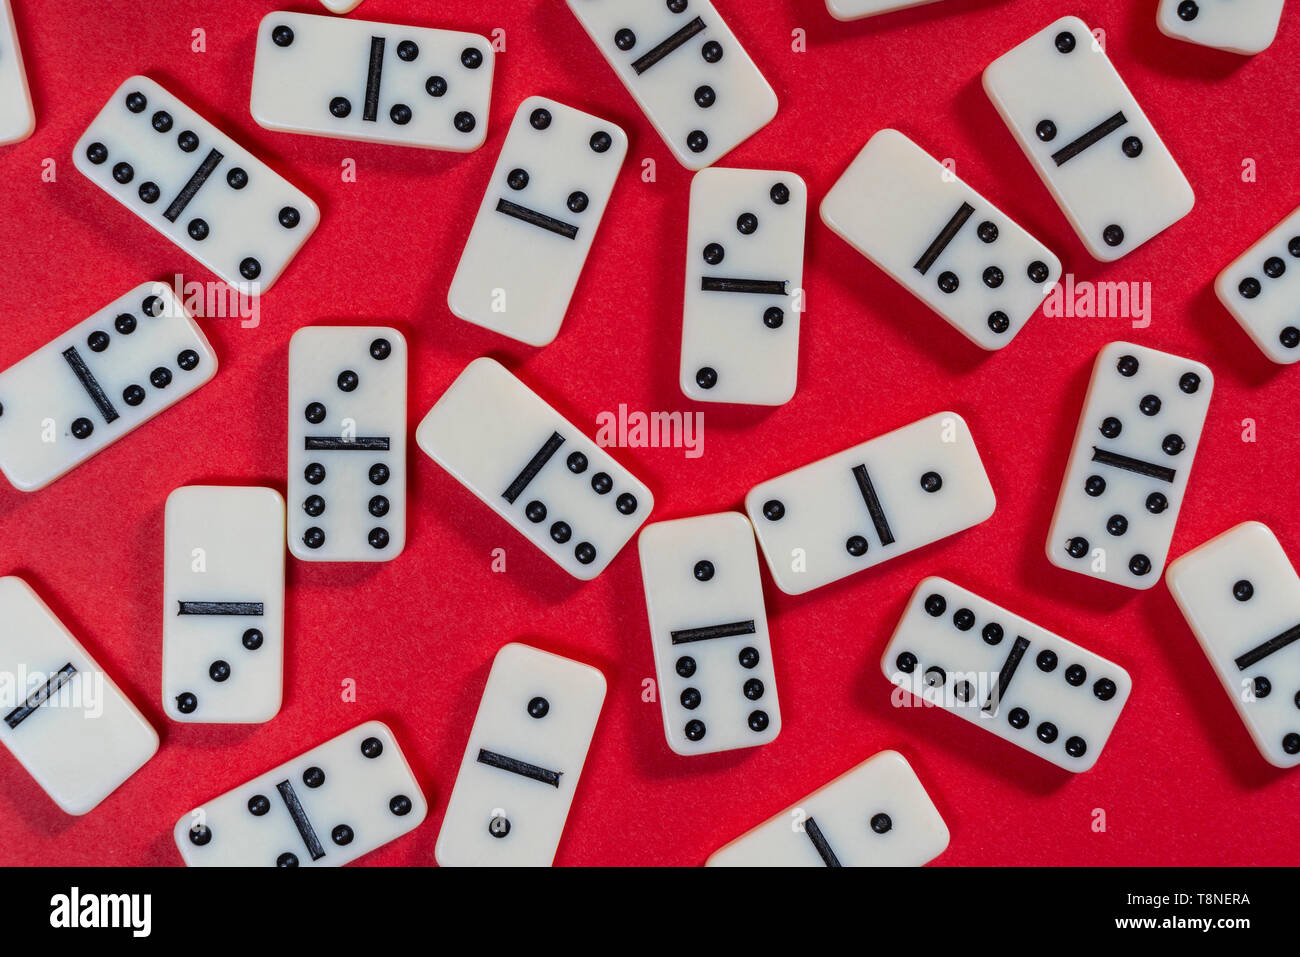 The Domino Game Pieces On A Red Colored Surface Stock Photo Alamy